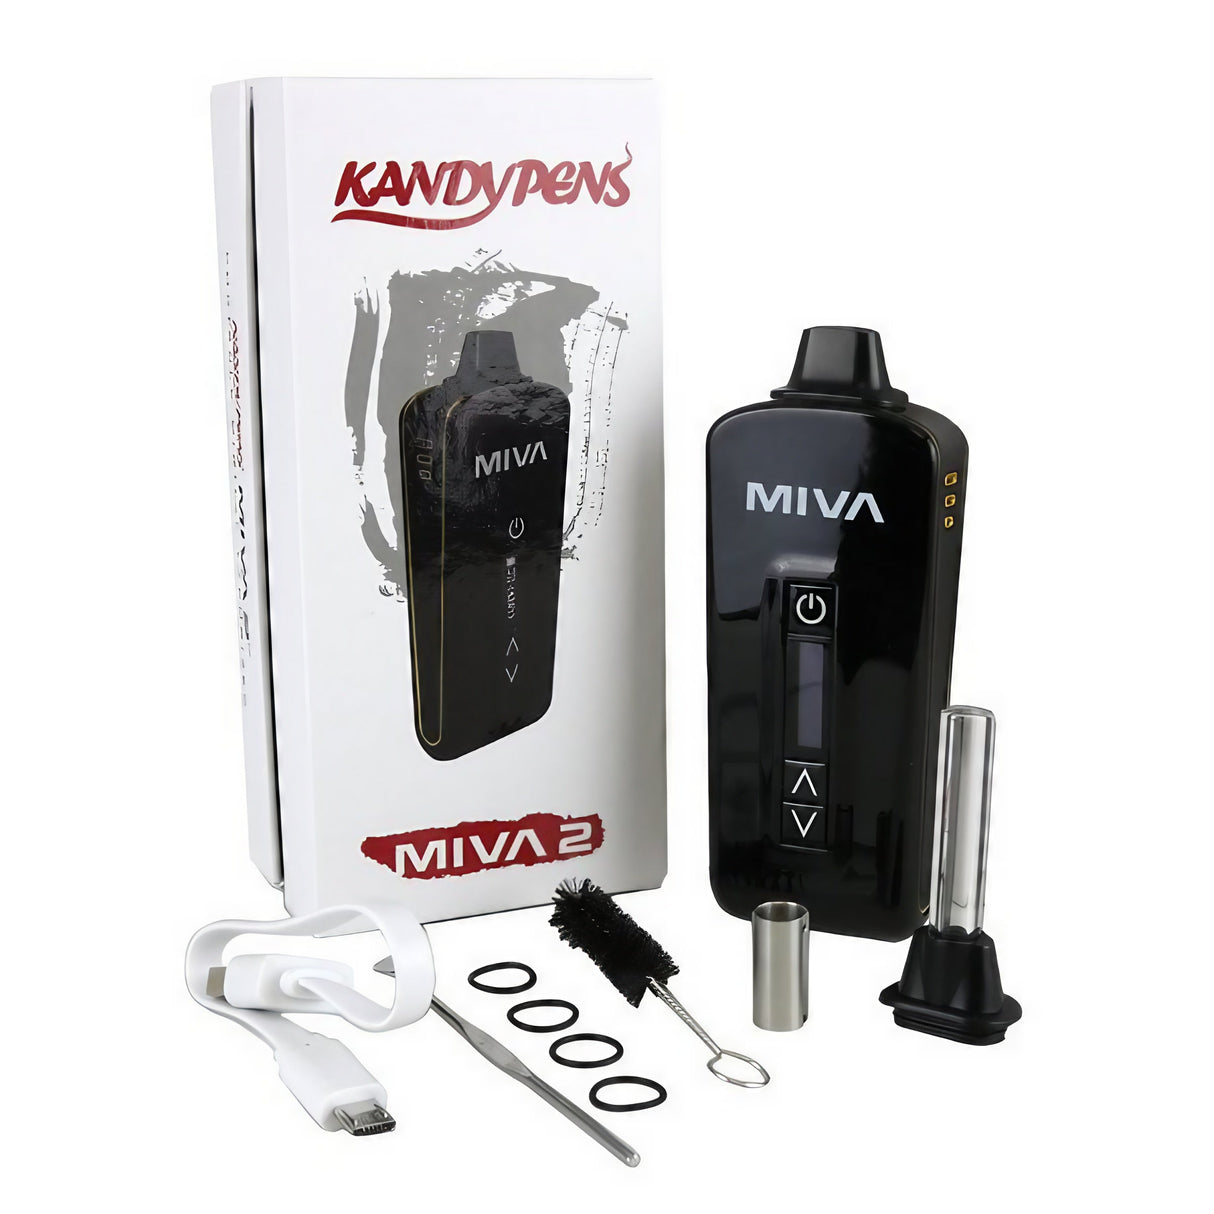 KandyPens MIVA 2 Vaporizer with accessories and packaging, front view on white background